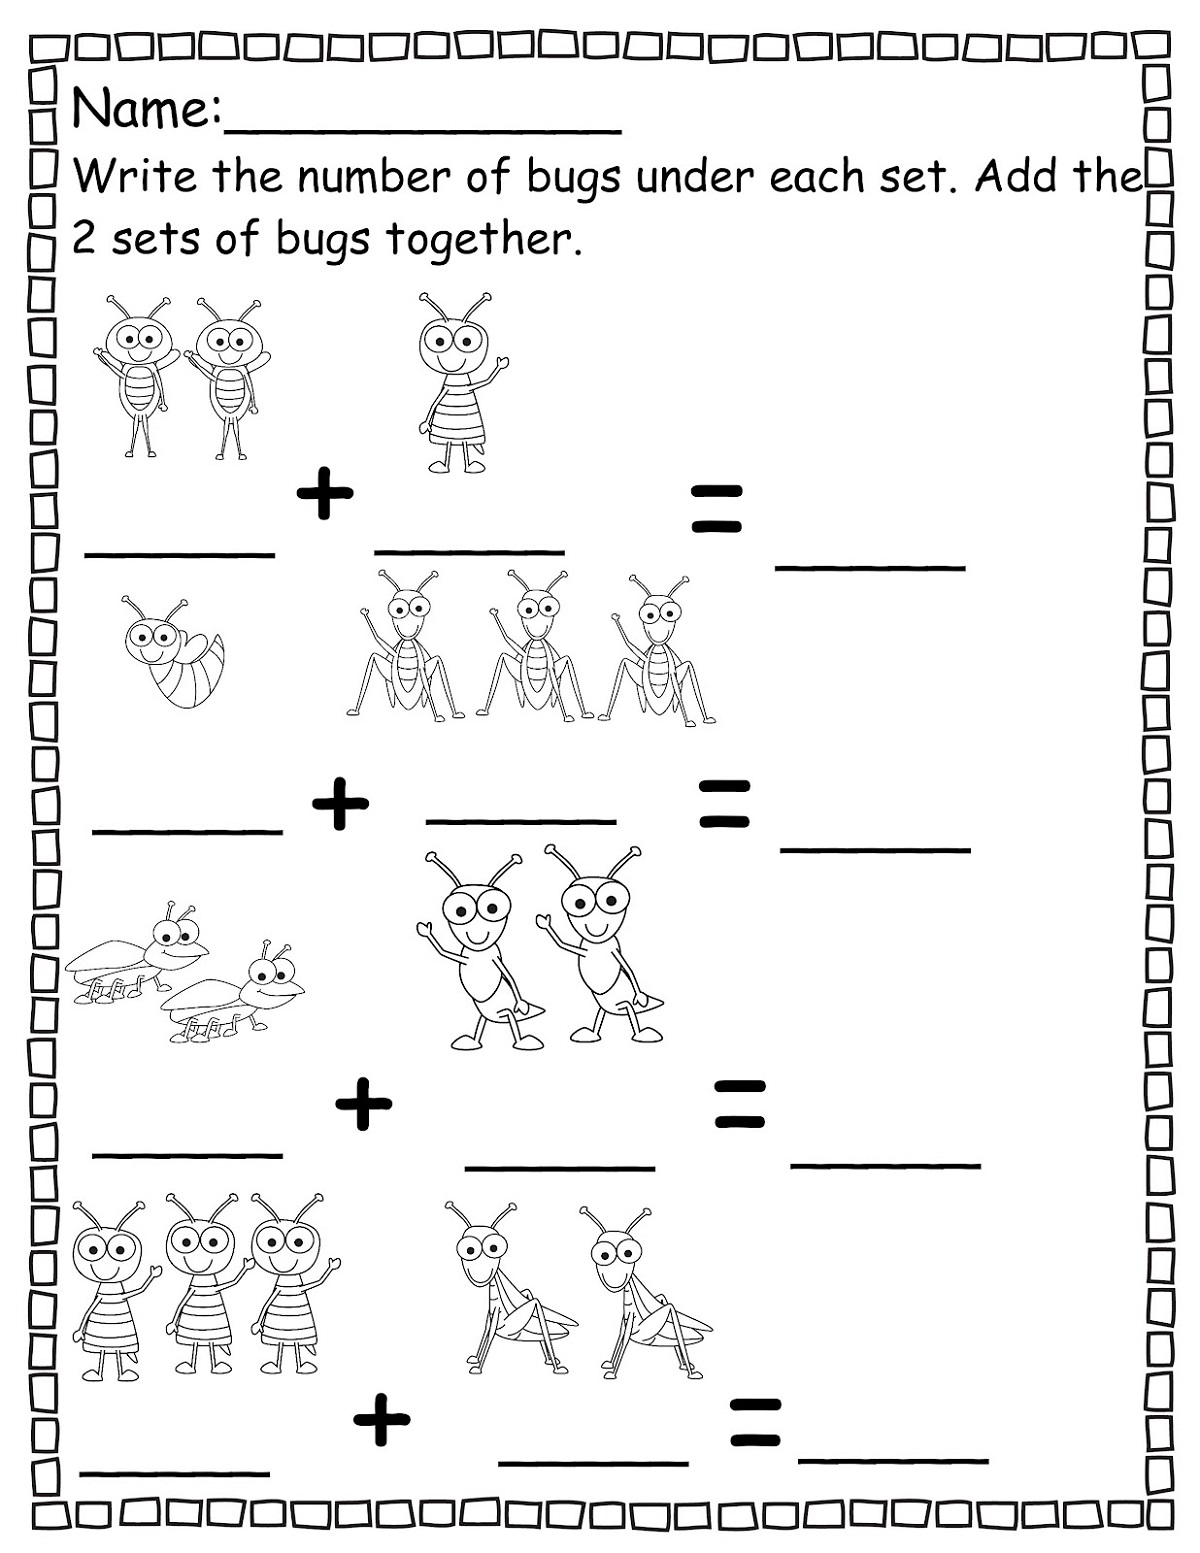 simple-math-worksheets-eiapo